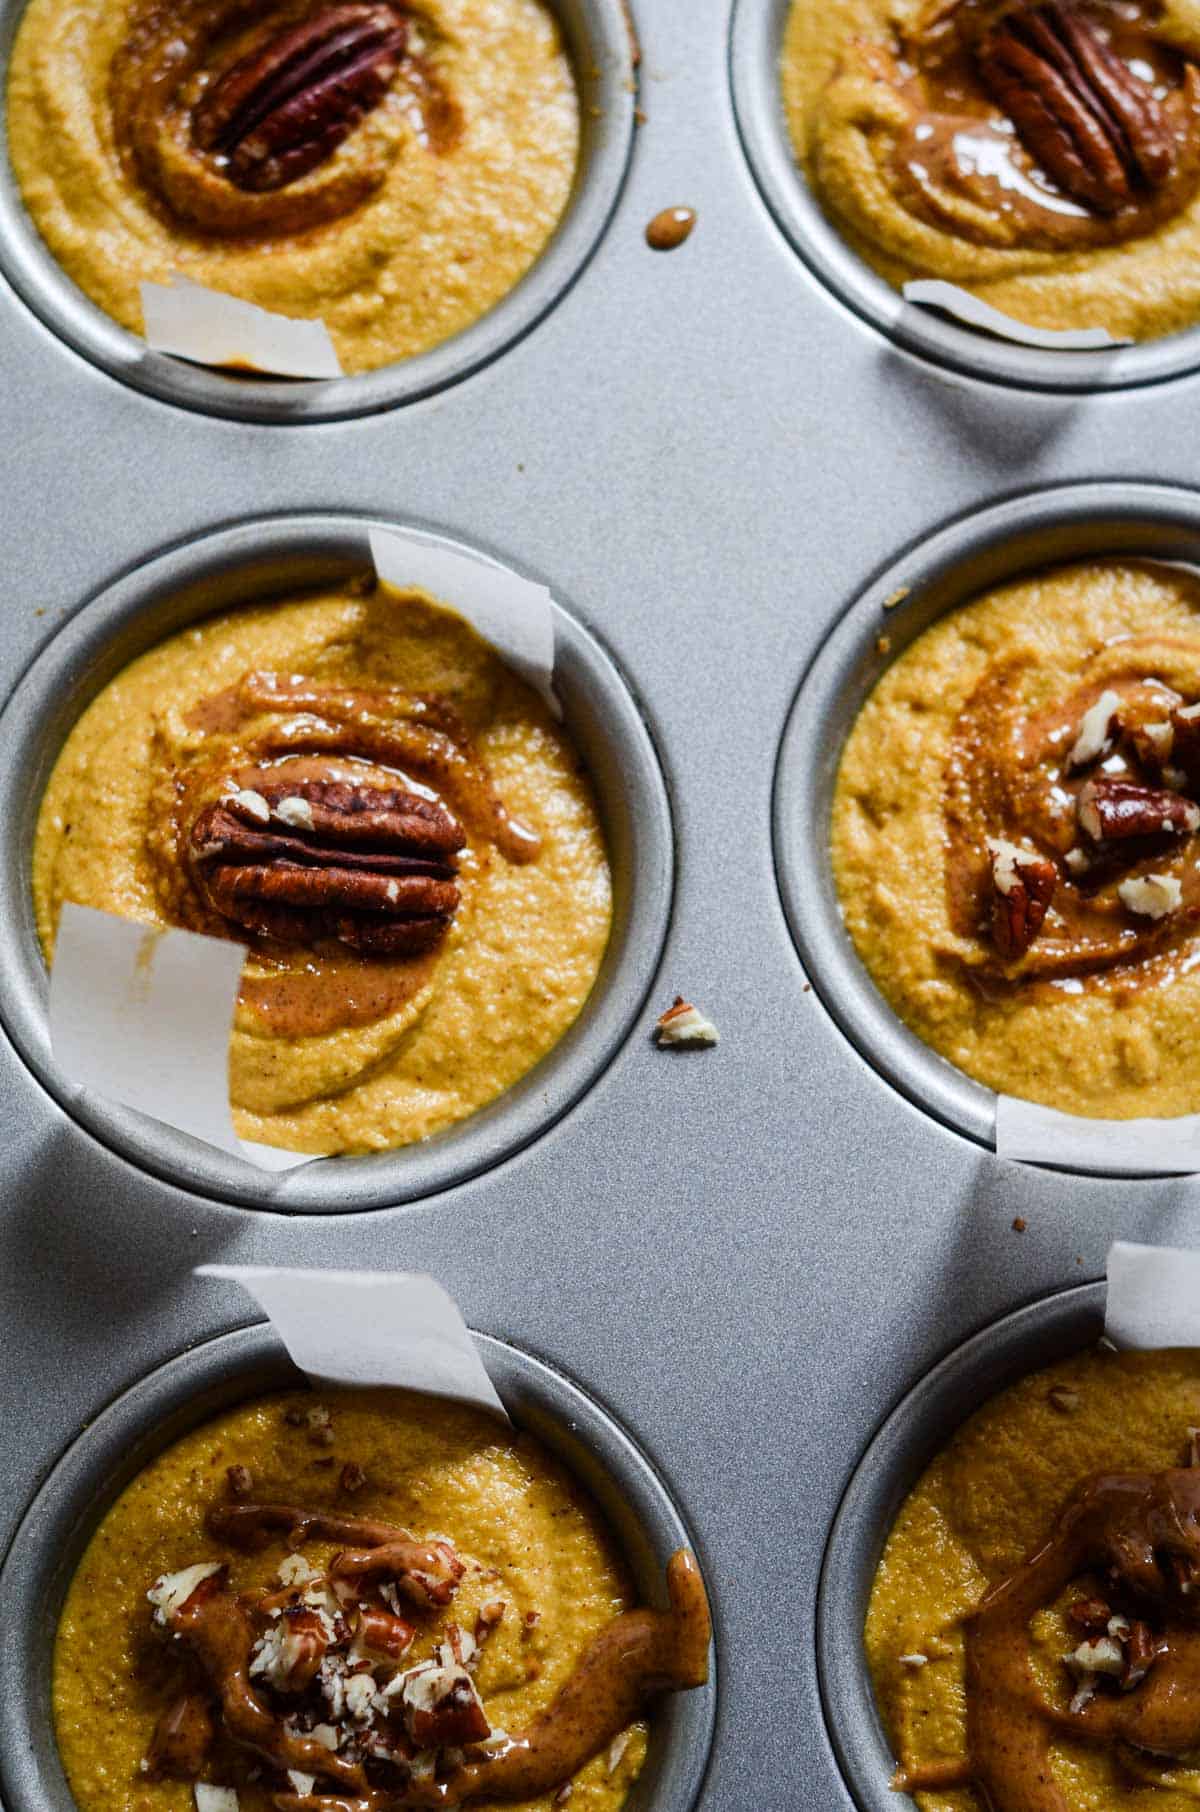 Dairy free cheesecake batter made from cashews in muffin tin with pecans on top.